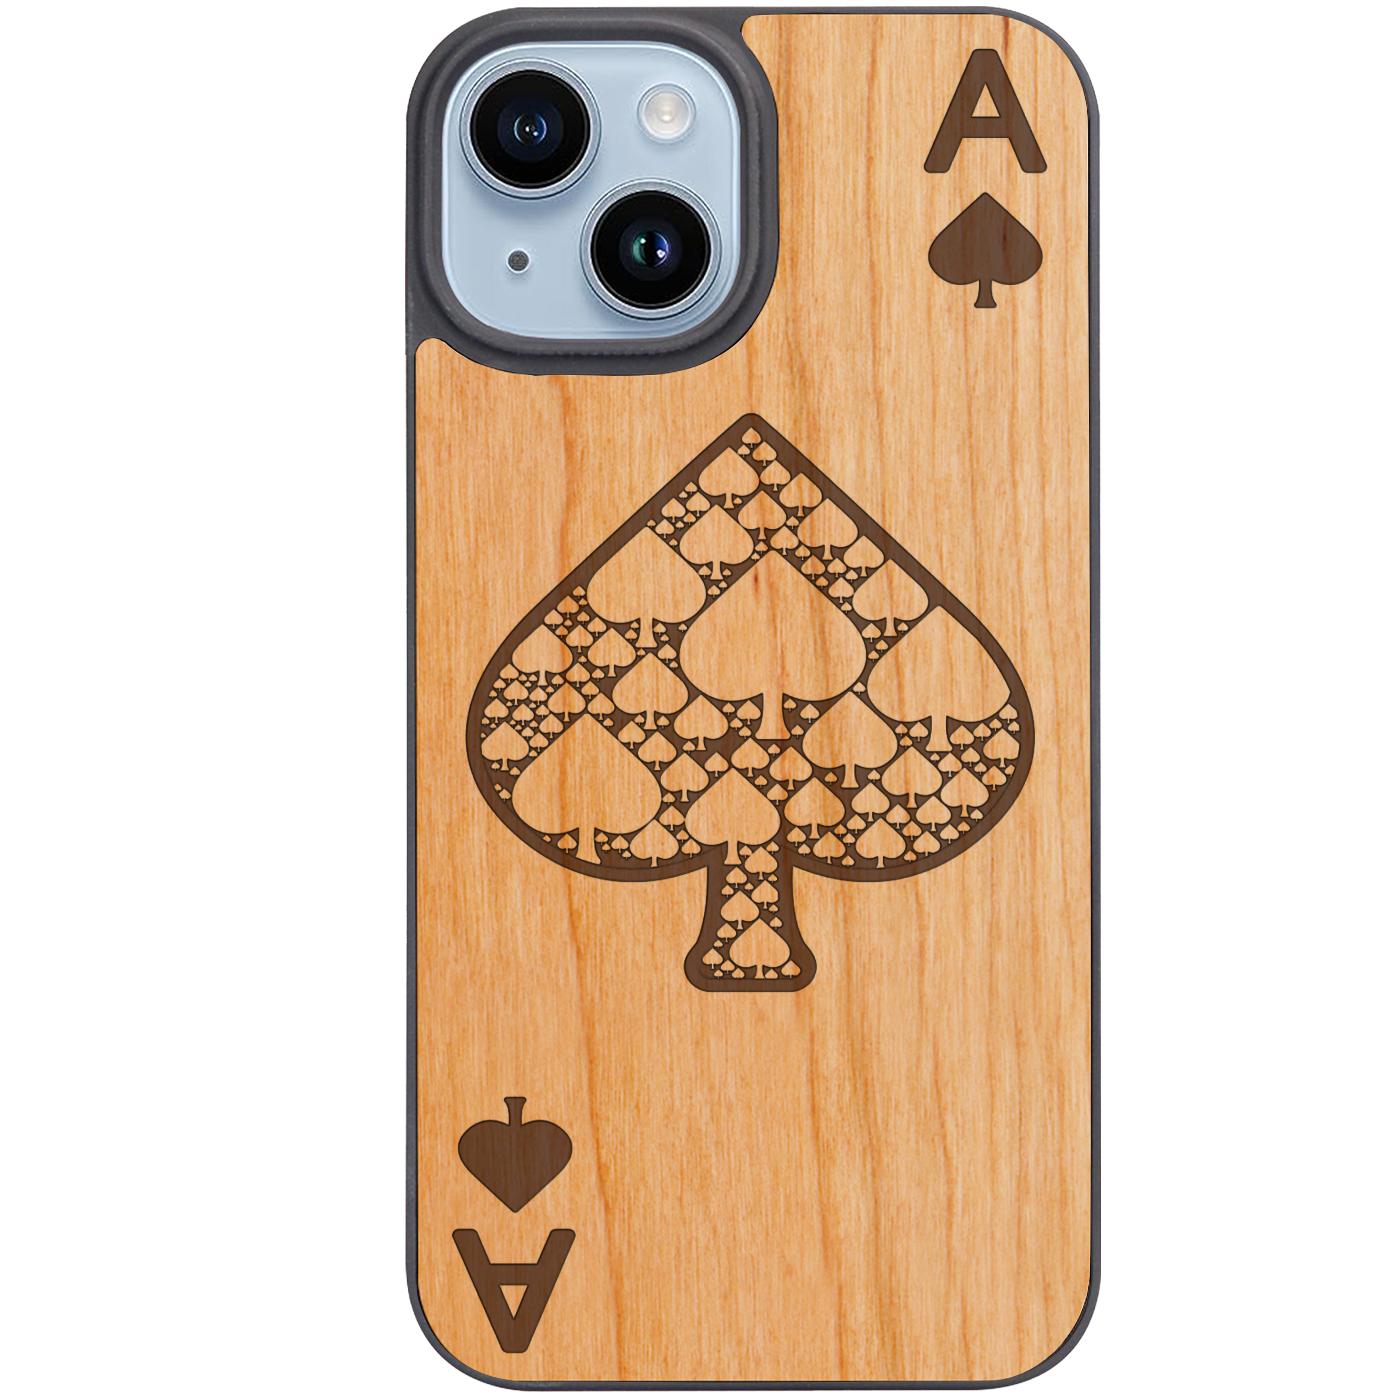 Ace of Spades - Engraved Phone Case